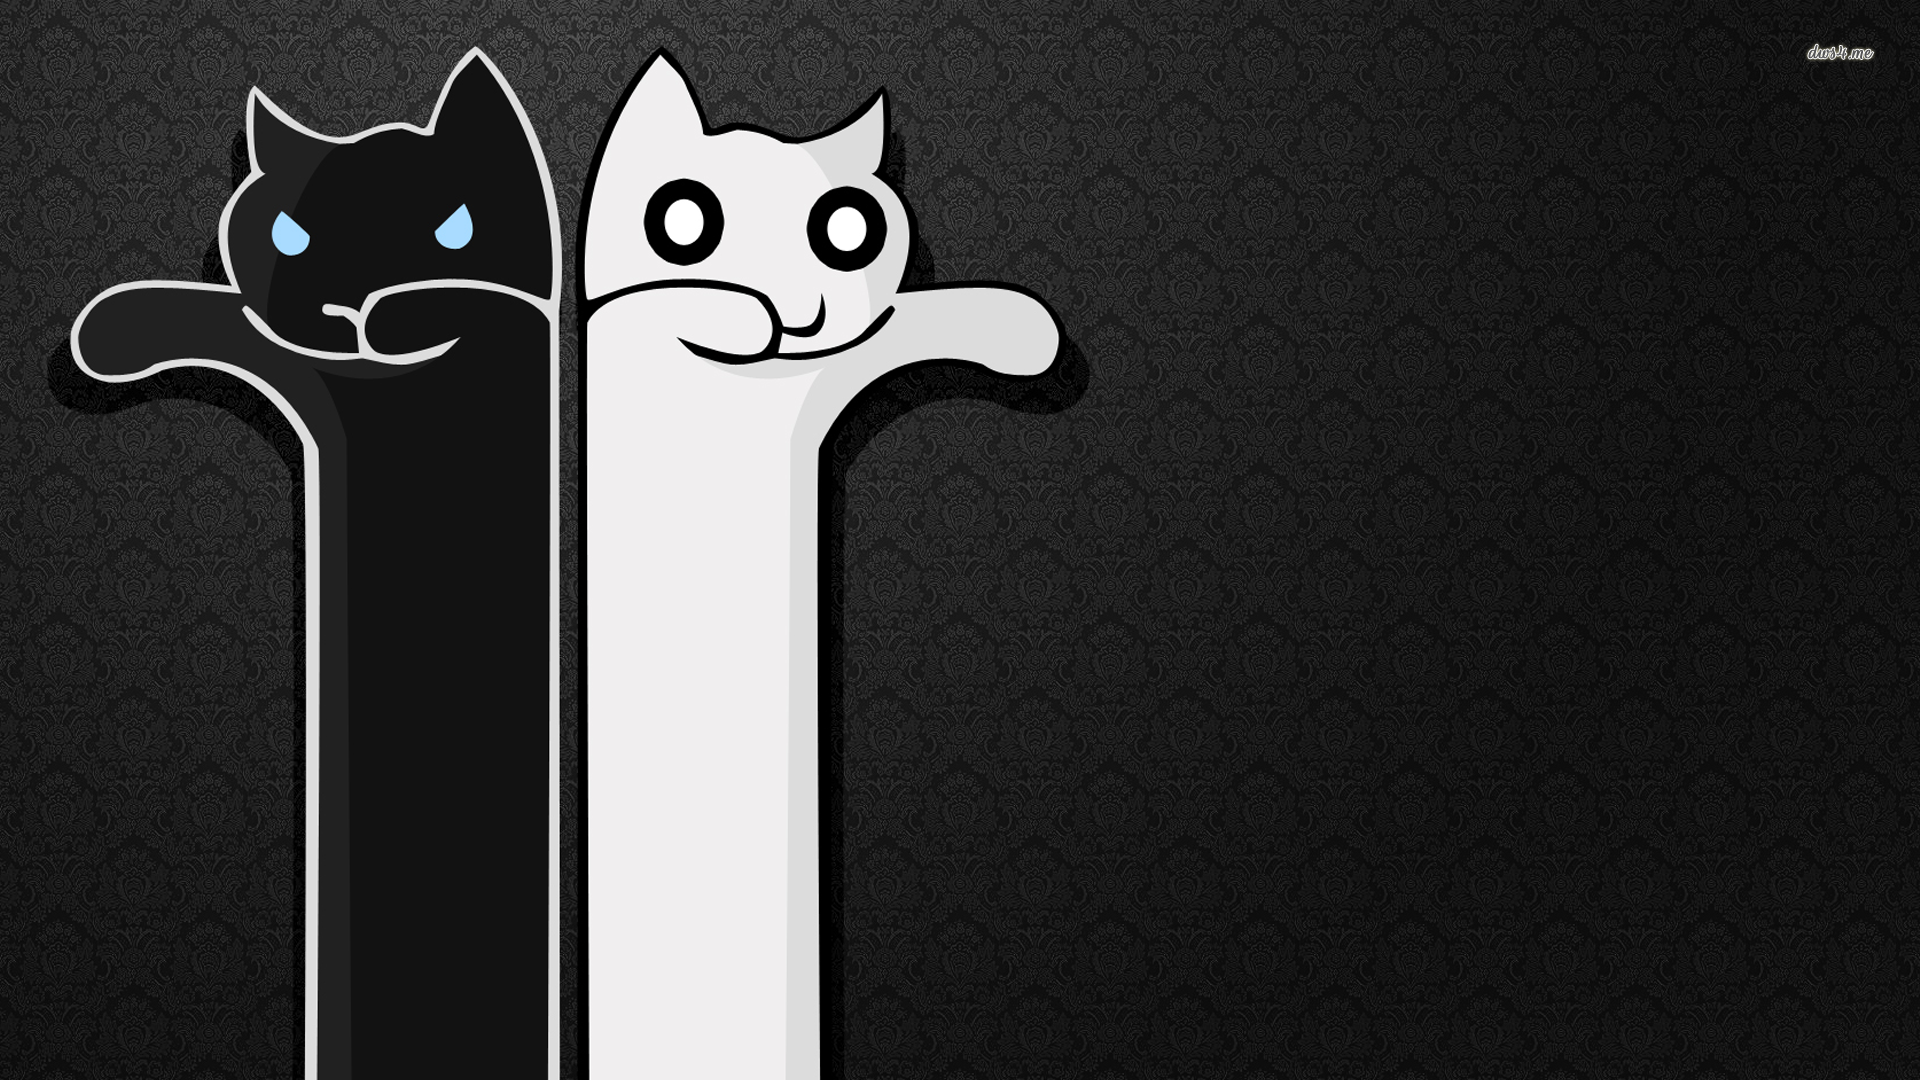 Black cat and white Longcats wallpaper - Vector wallpapers - #11165